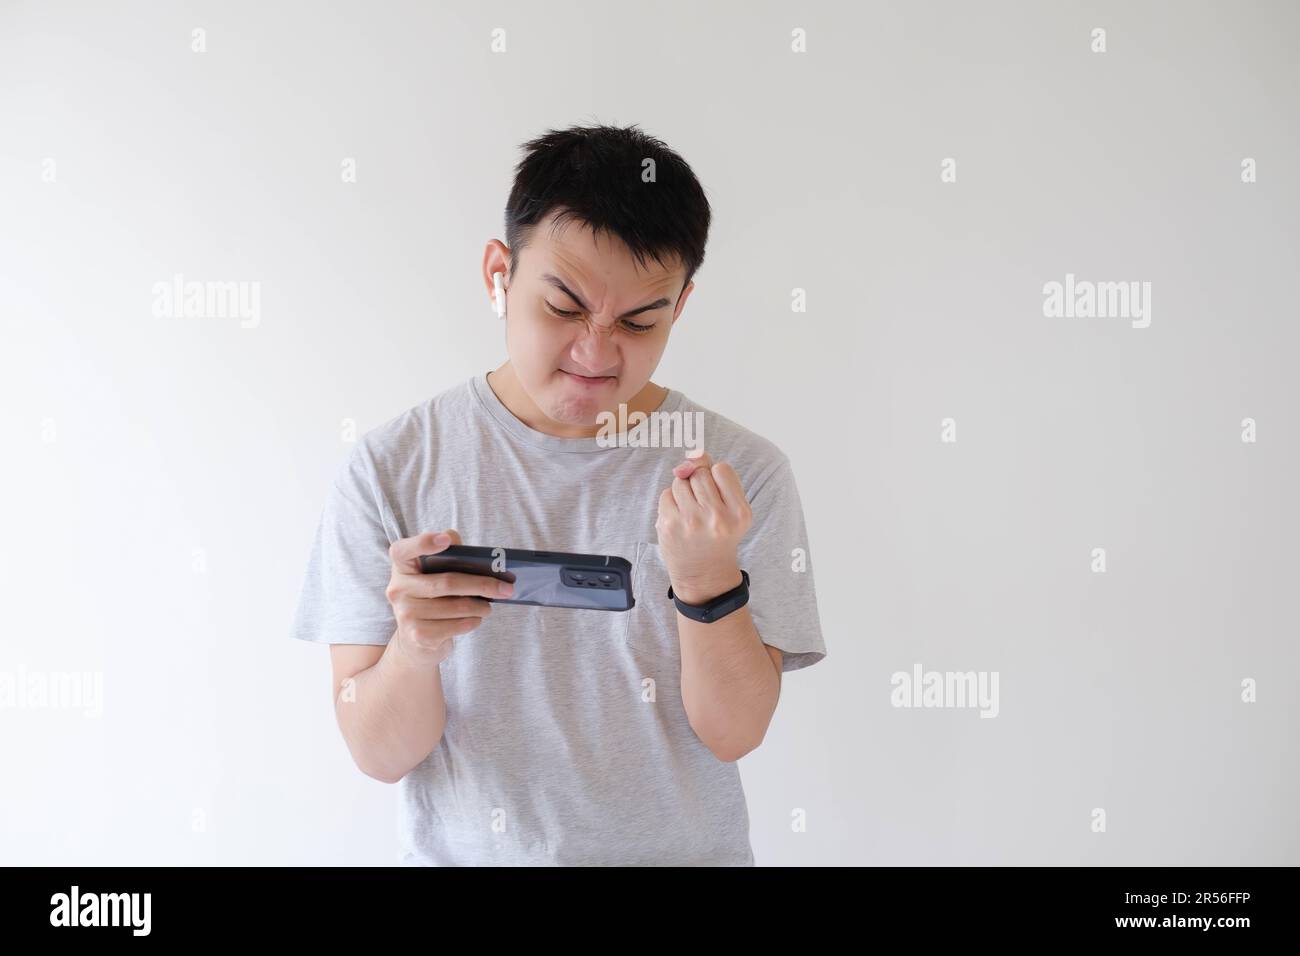 A young Asian man wearing a gray t-shirt is angry while playing a game on his smartphone. Isolated white background. Stock Photo